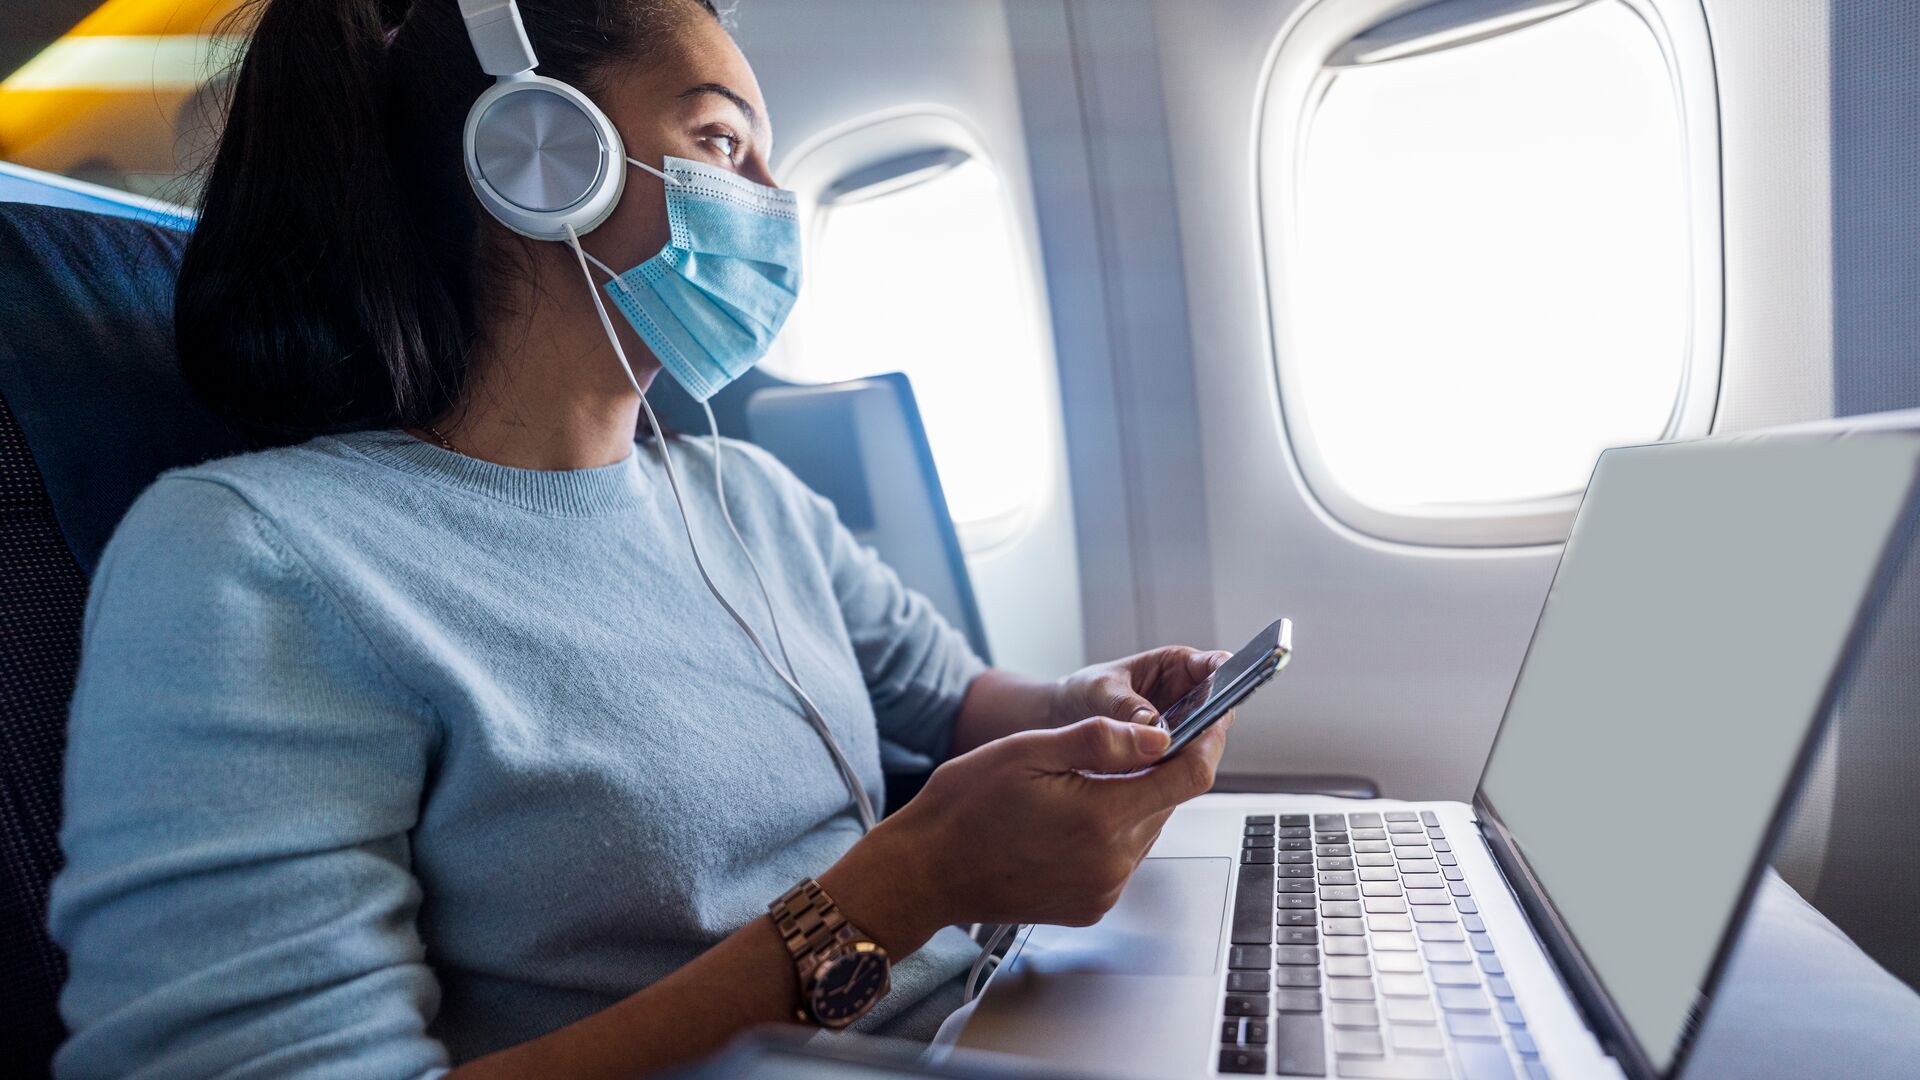 Women waiting for plane at gate on her phone with a mask on to prevent the spread of Covid-19 while a plane takes off behind her. Representing the post-pandemic environment for airlines.